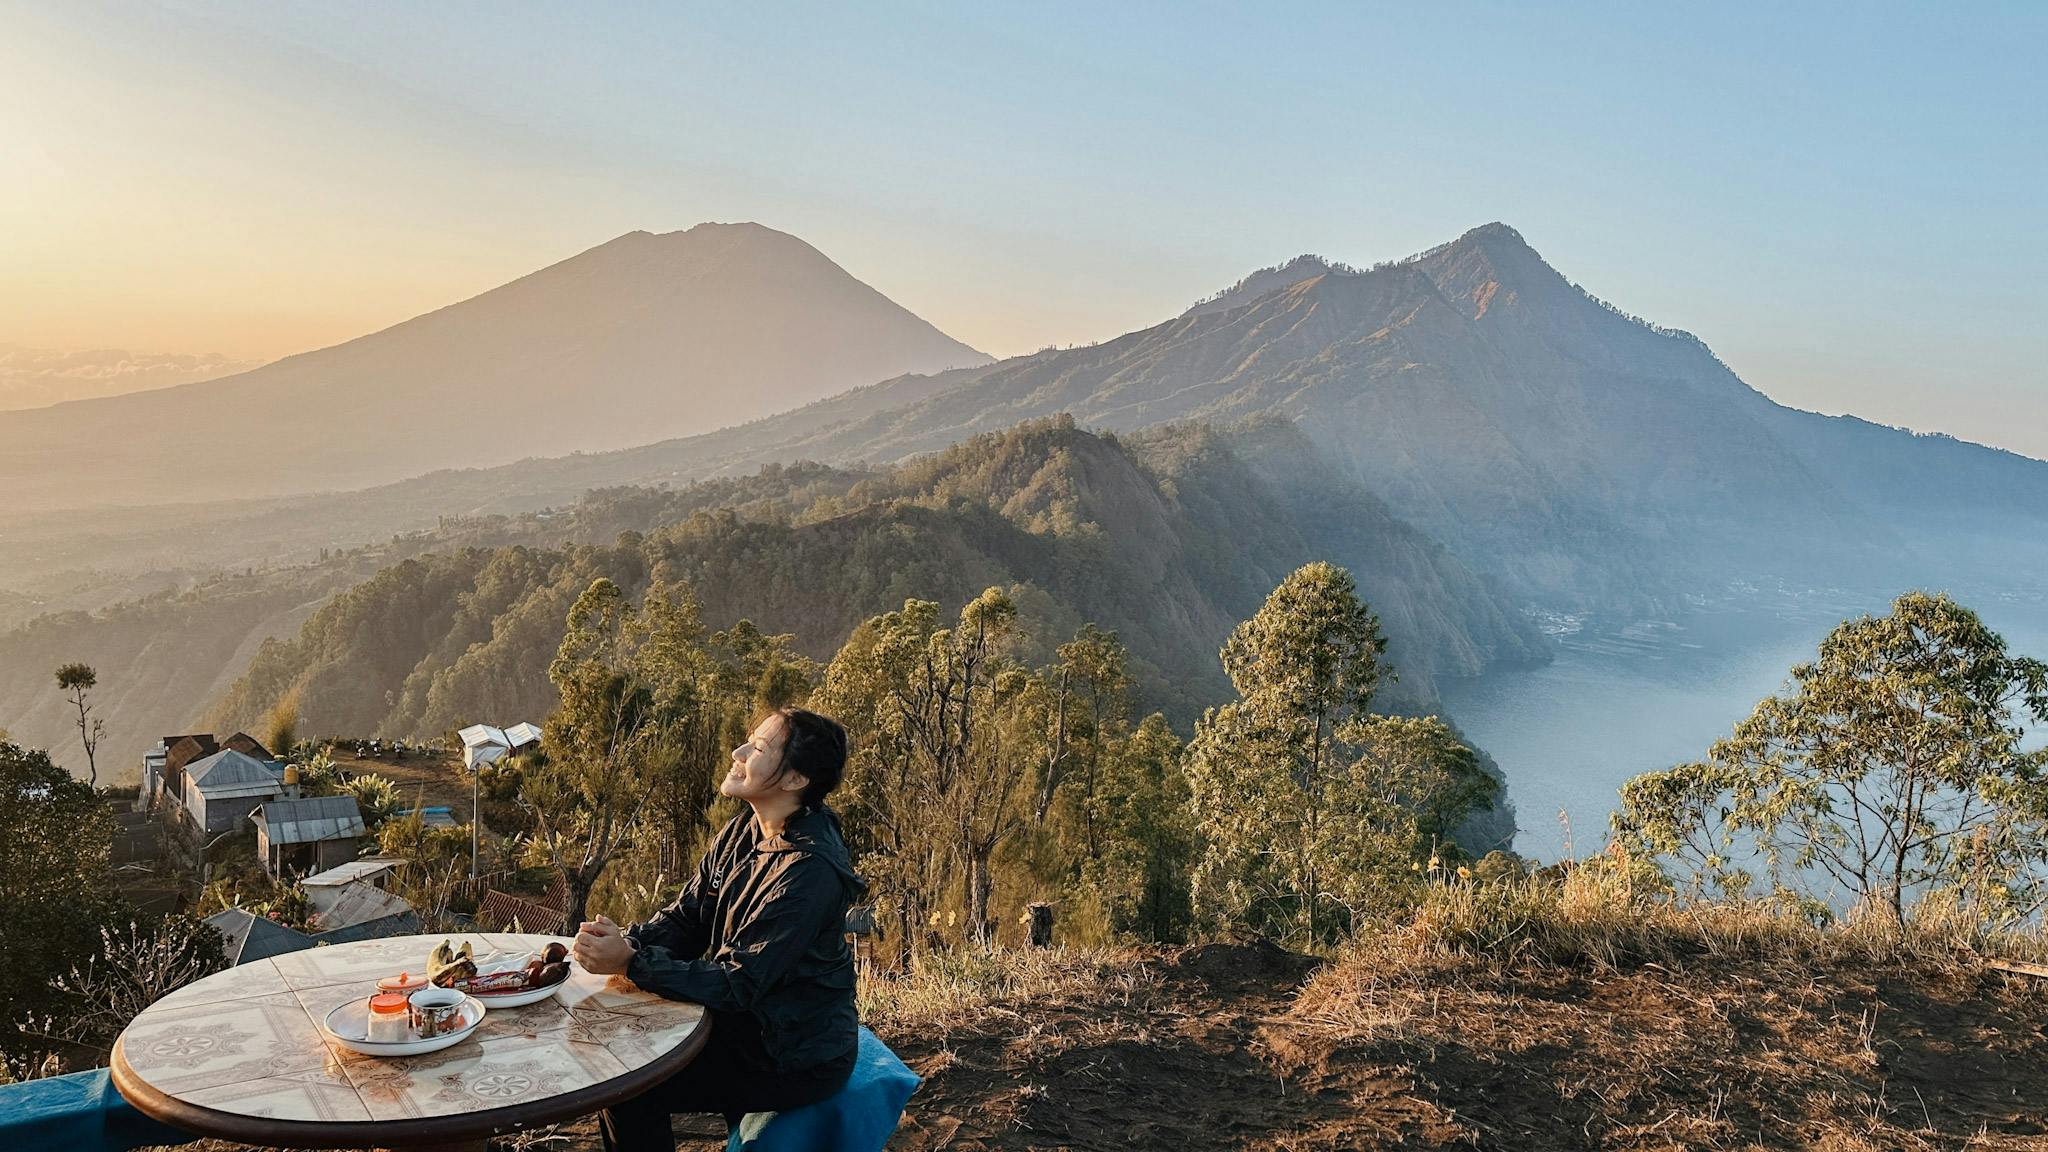 Check off your Bali hitlist with the most off-grid route up Mt Batur, Bali's most visited volcano.